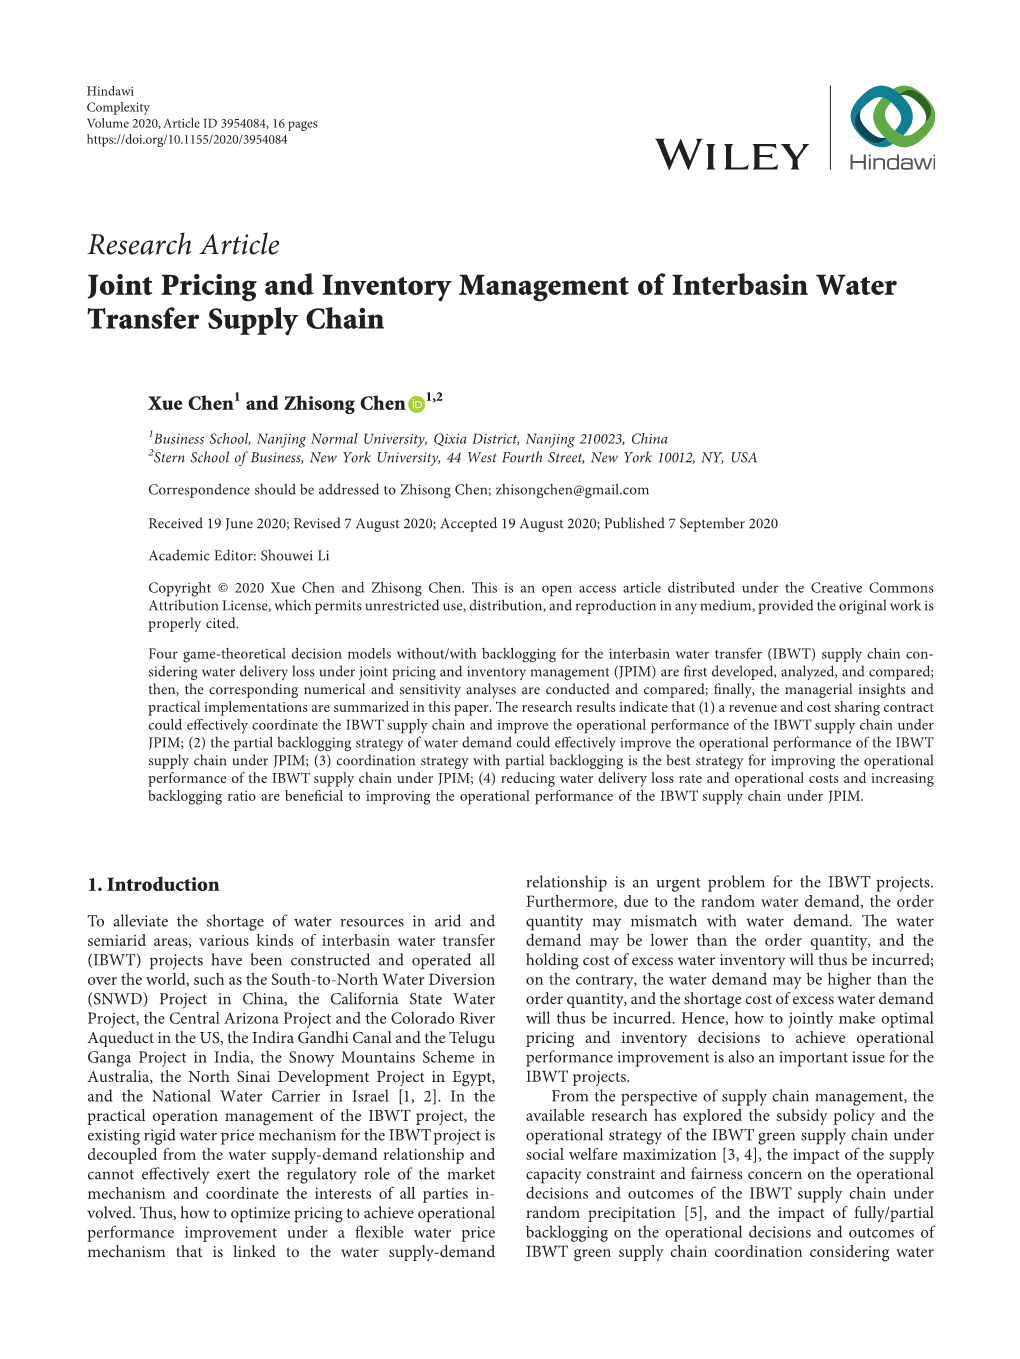 Research Article Joint Pricing and Inventory Management of Interbasin Water Transfer Supply Chain